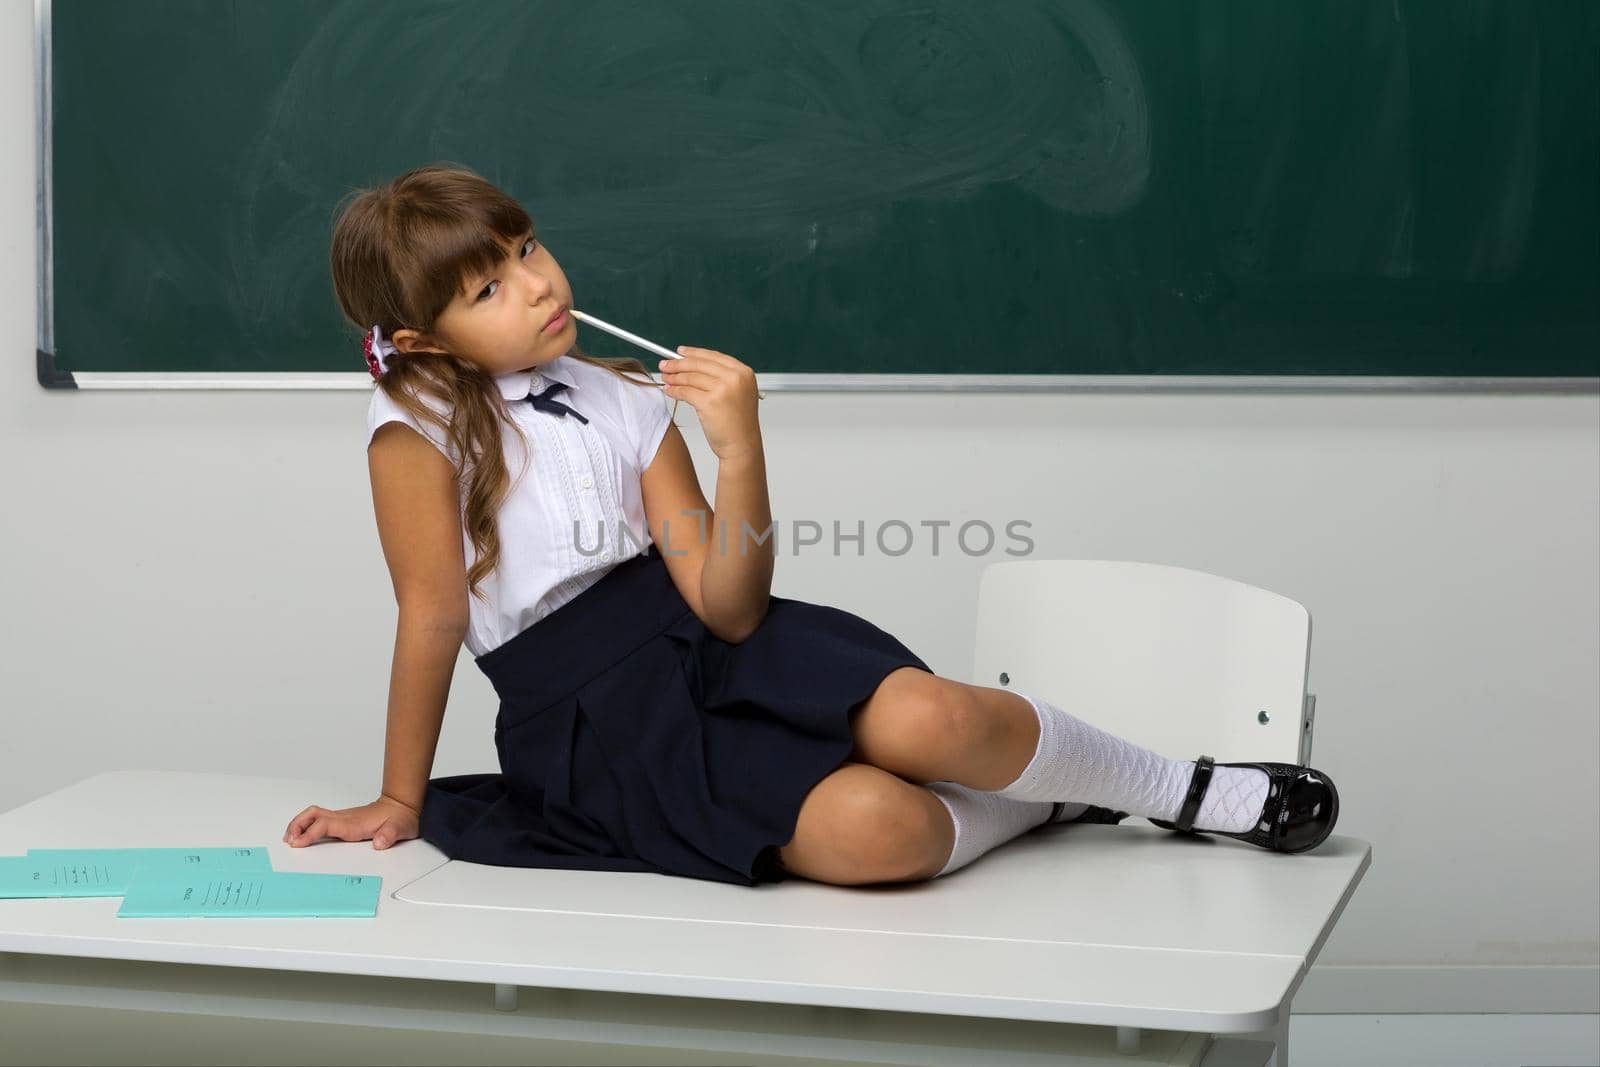 Cute girl sitting on desk in classroom. Adorable girl student in white blouse and blue skirt holding pen in her hand posing at blackboard. School and education concept